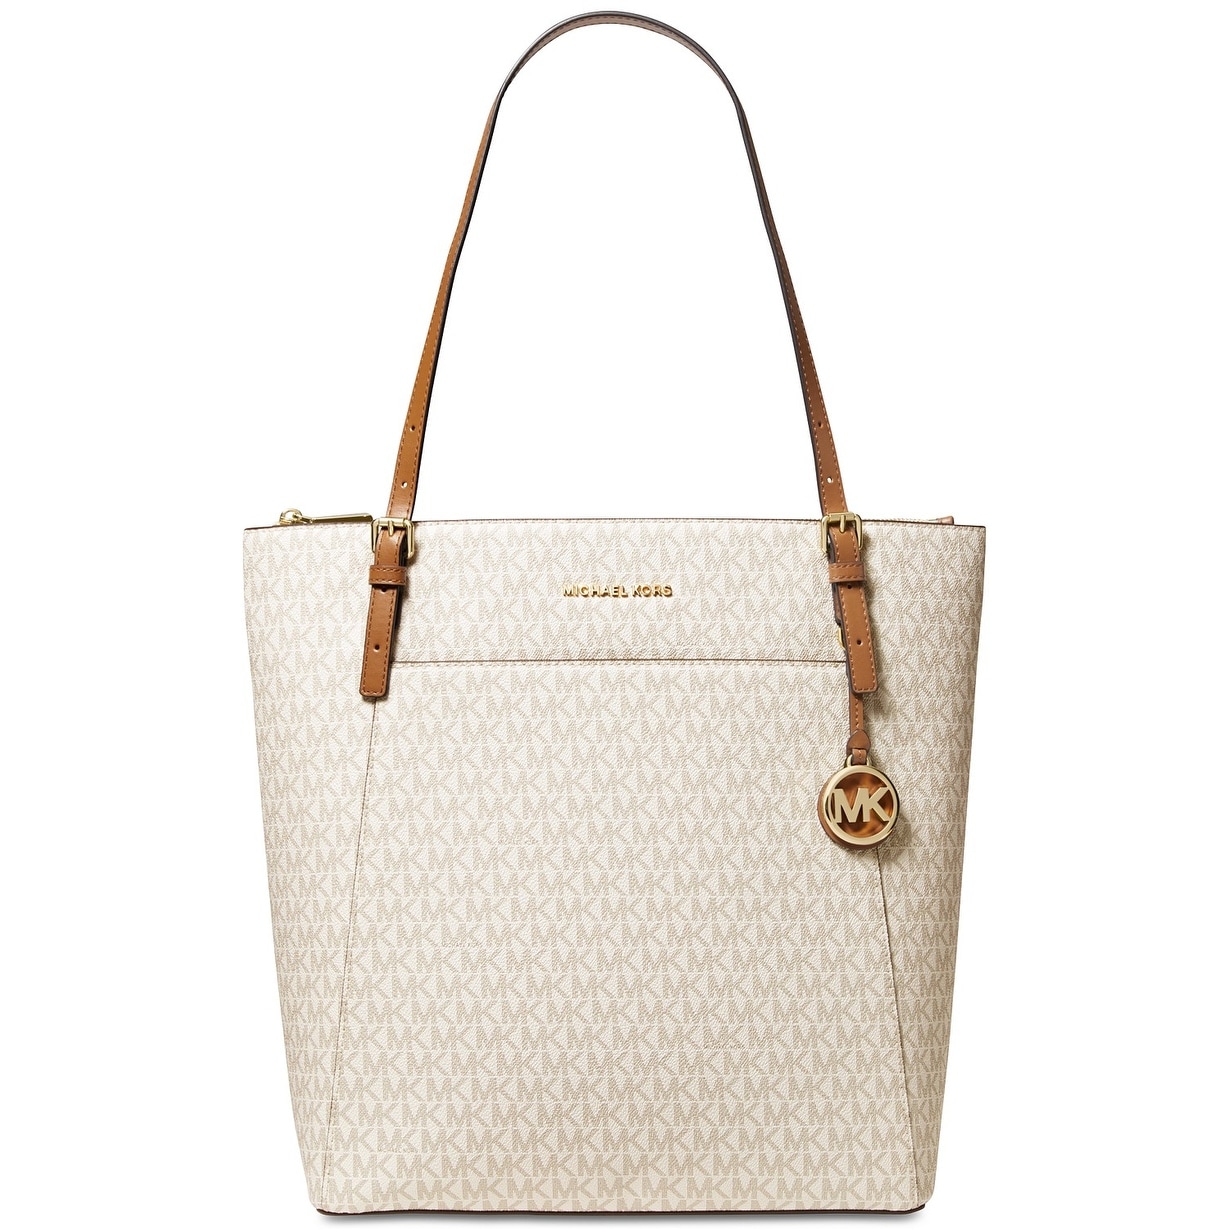 michael kors bag with laptop compartment